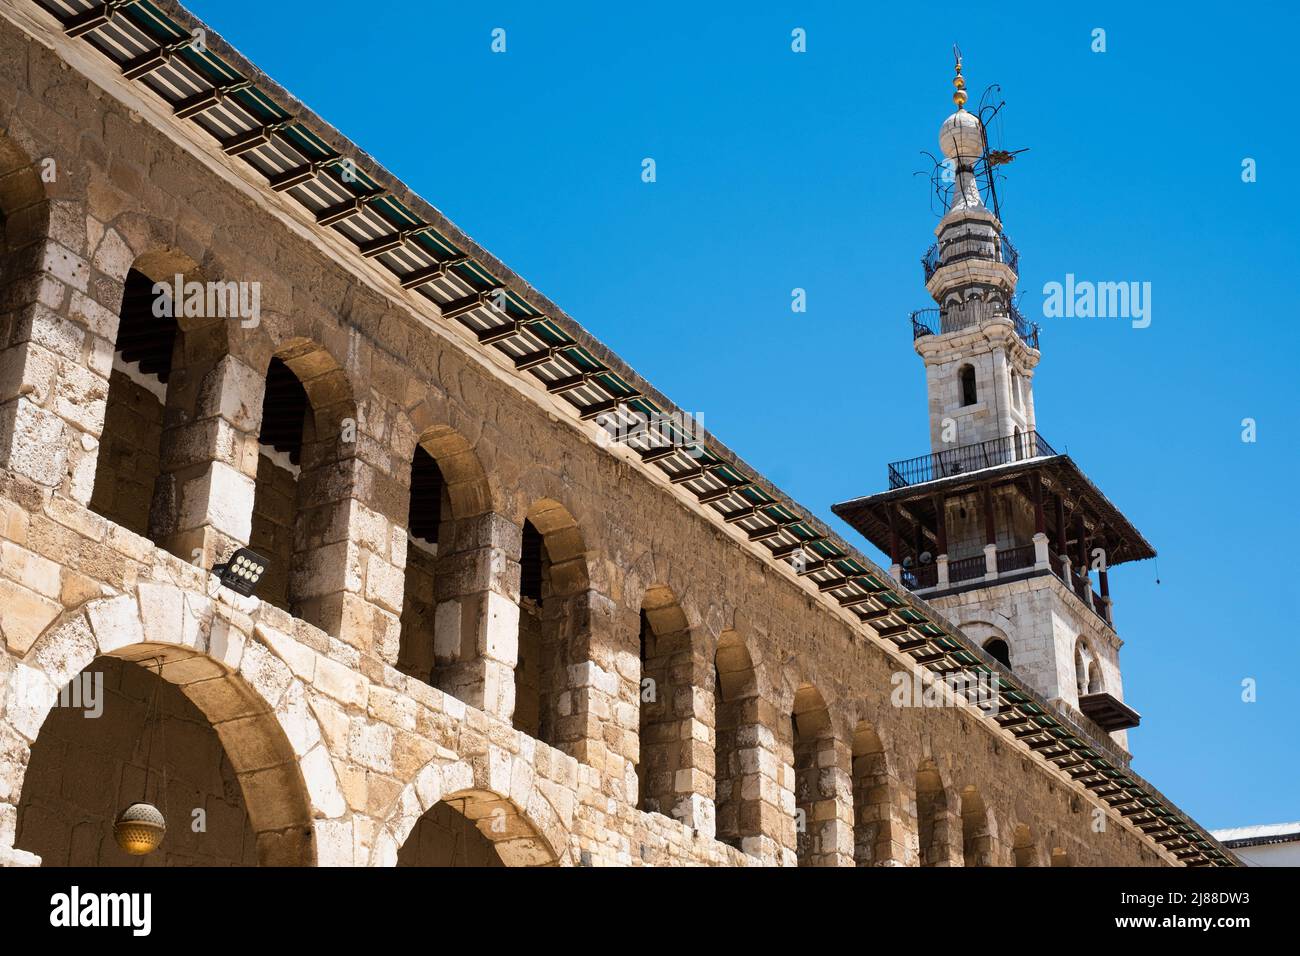 Damascus, Syria -May, 2022: A minaret of the Umayyad Mosque, also known as the Great Mosque of Damascus Stock Photo